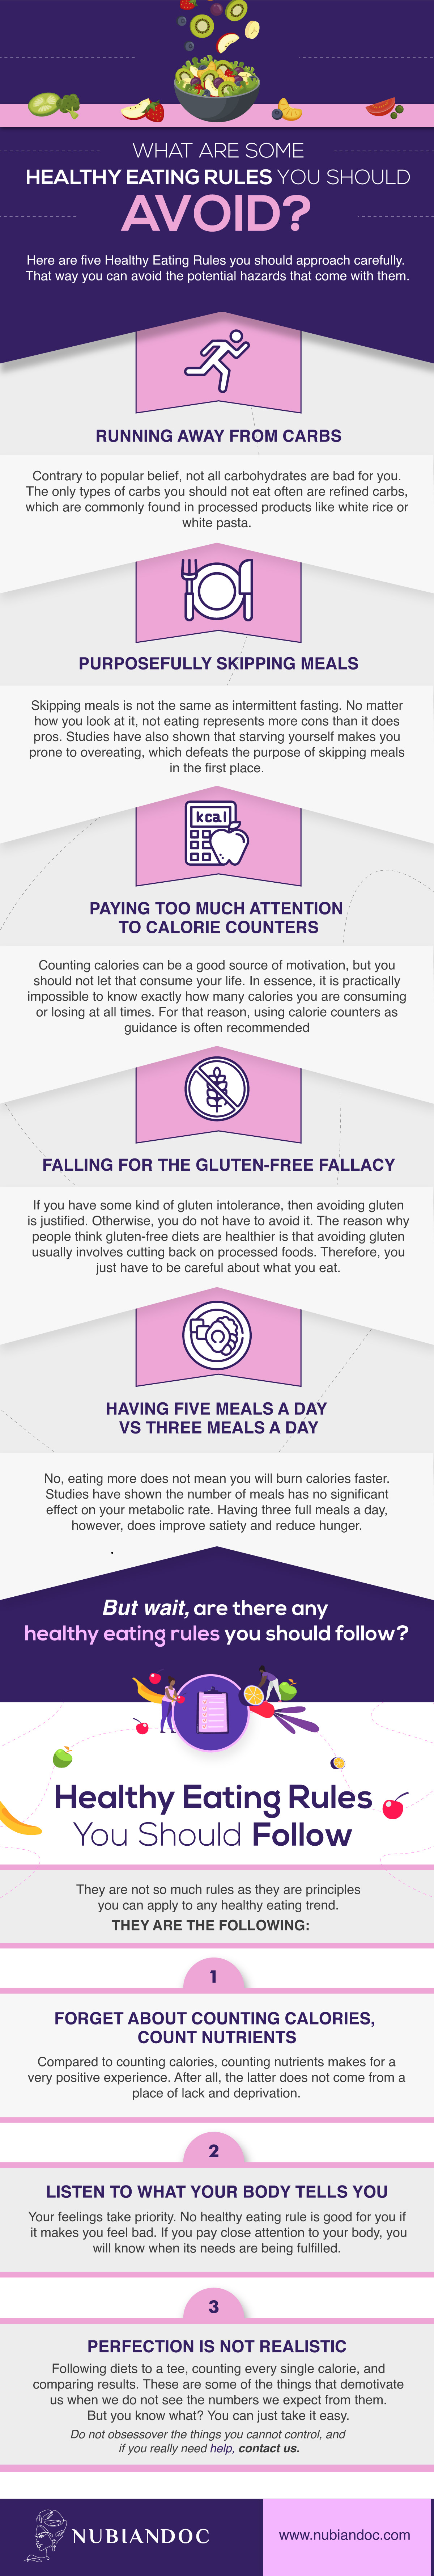 Infographic Showcasing the Healthy Eating Rules You Should Avoid By NubianDoc